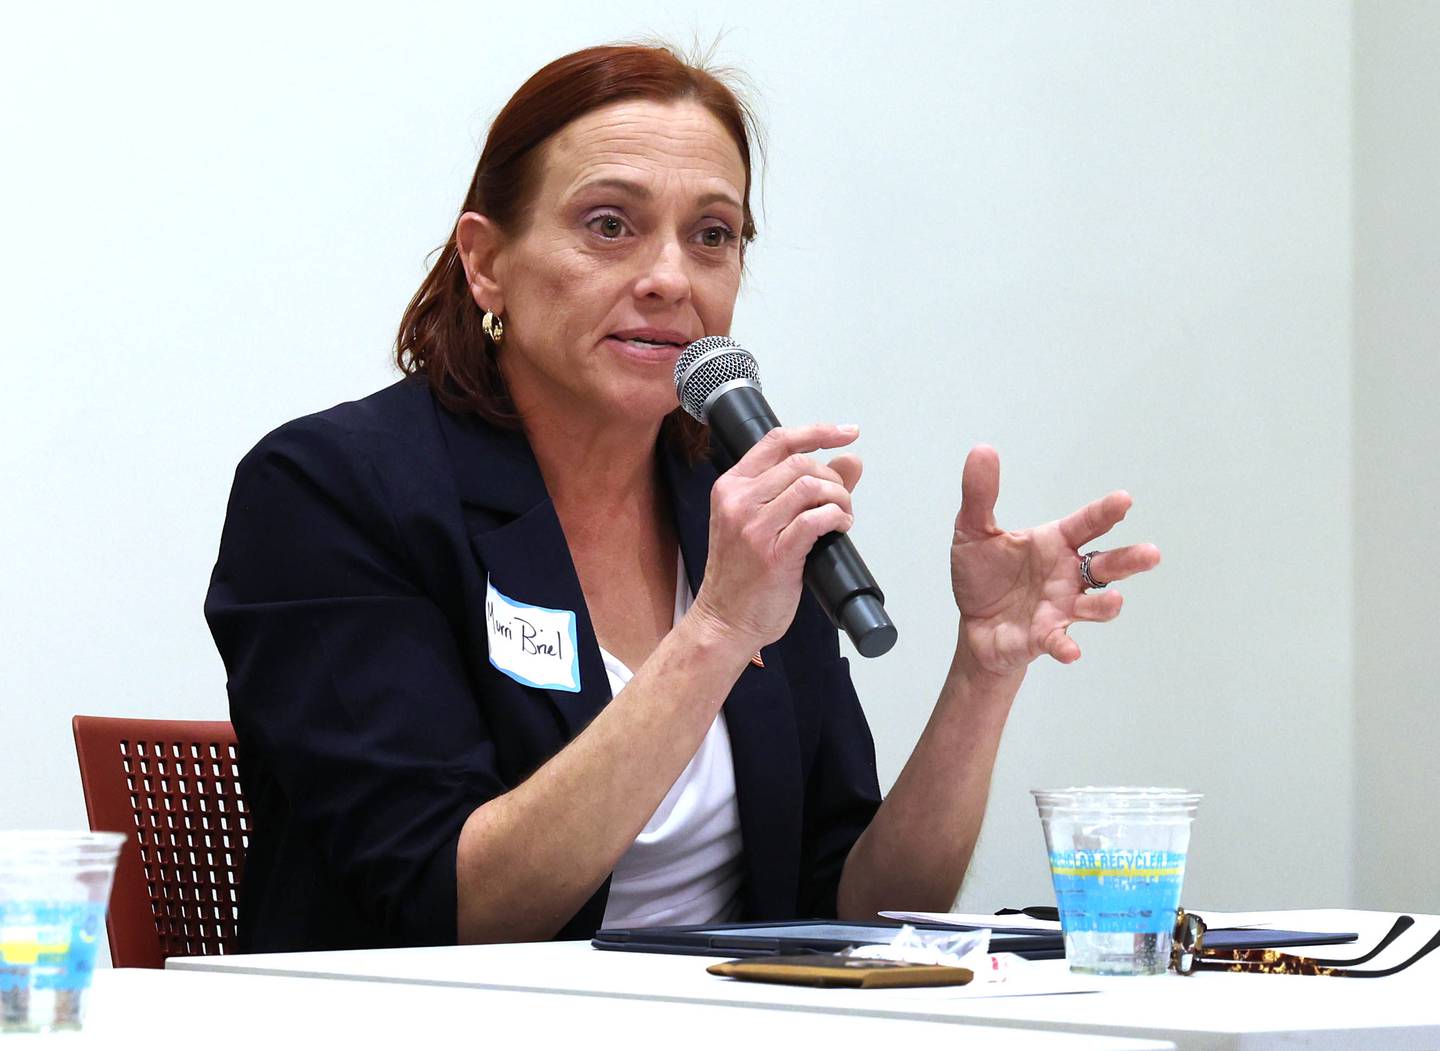 Democratic candidate Amy Murri Briel, who is vying for the nomination for the 76th district seat in the Illinois House of Representatives, answers a question Saturday, Feb. 3, 2024, in a meet the candidates forum at the DeKalb Public Library. Democratic candidates Cohen Barnes and Carolyn Zasada also spoke at the event organized by DeKalb Stands and co-sponsored by the DeKalb County Democrats.